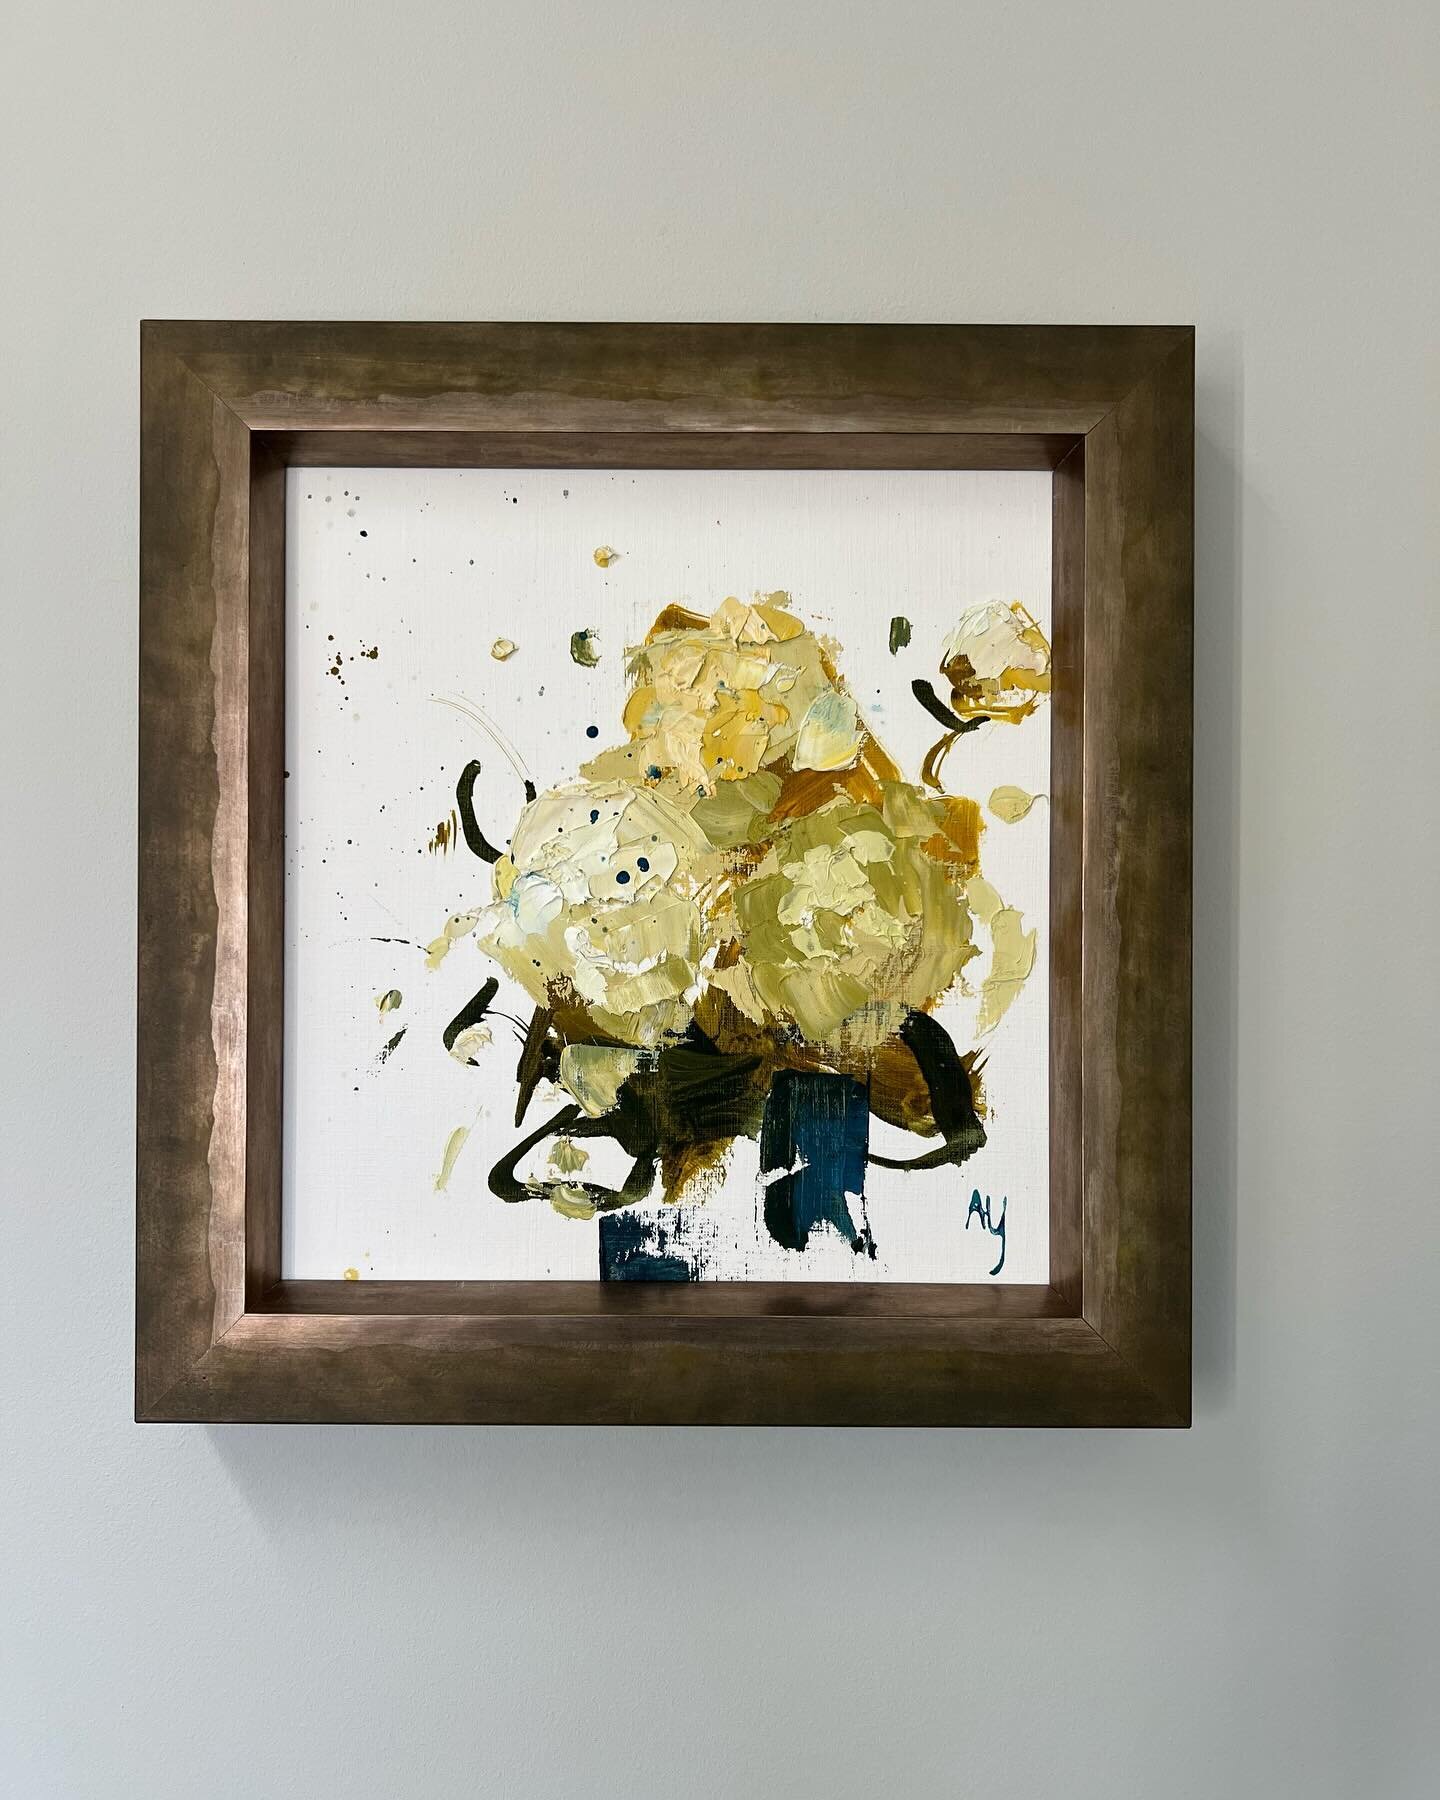 One of my small works on paper has found a forever home! I love to see my work custom framed and hanging! Such a treat. ❤️
.
.
#floralpainting #oilpainting #workonpaper #hydrangeas #hydrangeapainting